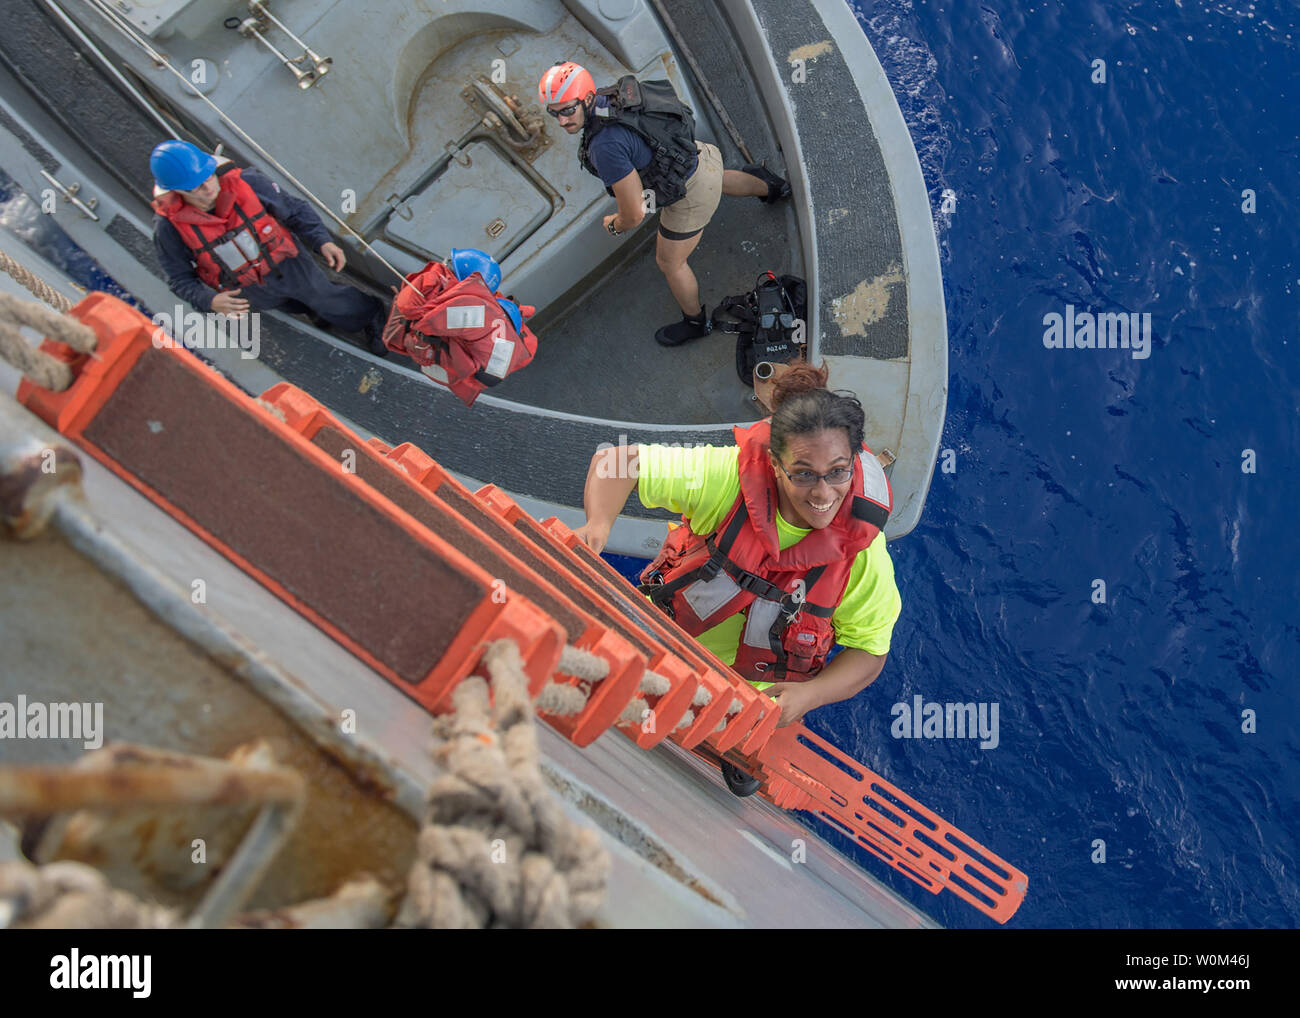 Tasha Fuiaba, an American mariner who had been sailing for five months on a damaged sailboat, climbs the accommodation ladder to board the amphibious dock landing ship USS Ashland (LSD 48) on October 25, 2017. Ashland, operating in the Indo-Asia-Pacific region on a routine deployment, rescued two American mariners who had been in distress for several months after their sailboat had a motor failure and had strayed well off its original course while traversing the Pacific Ocean. Photo by MC3 Jonathan Clay/U.S. Navy/UPI. Stock Photo